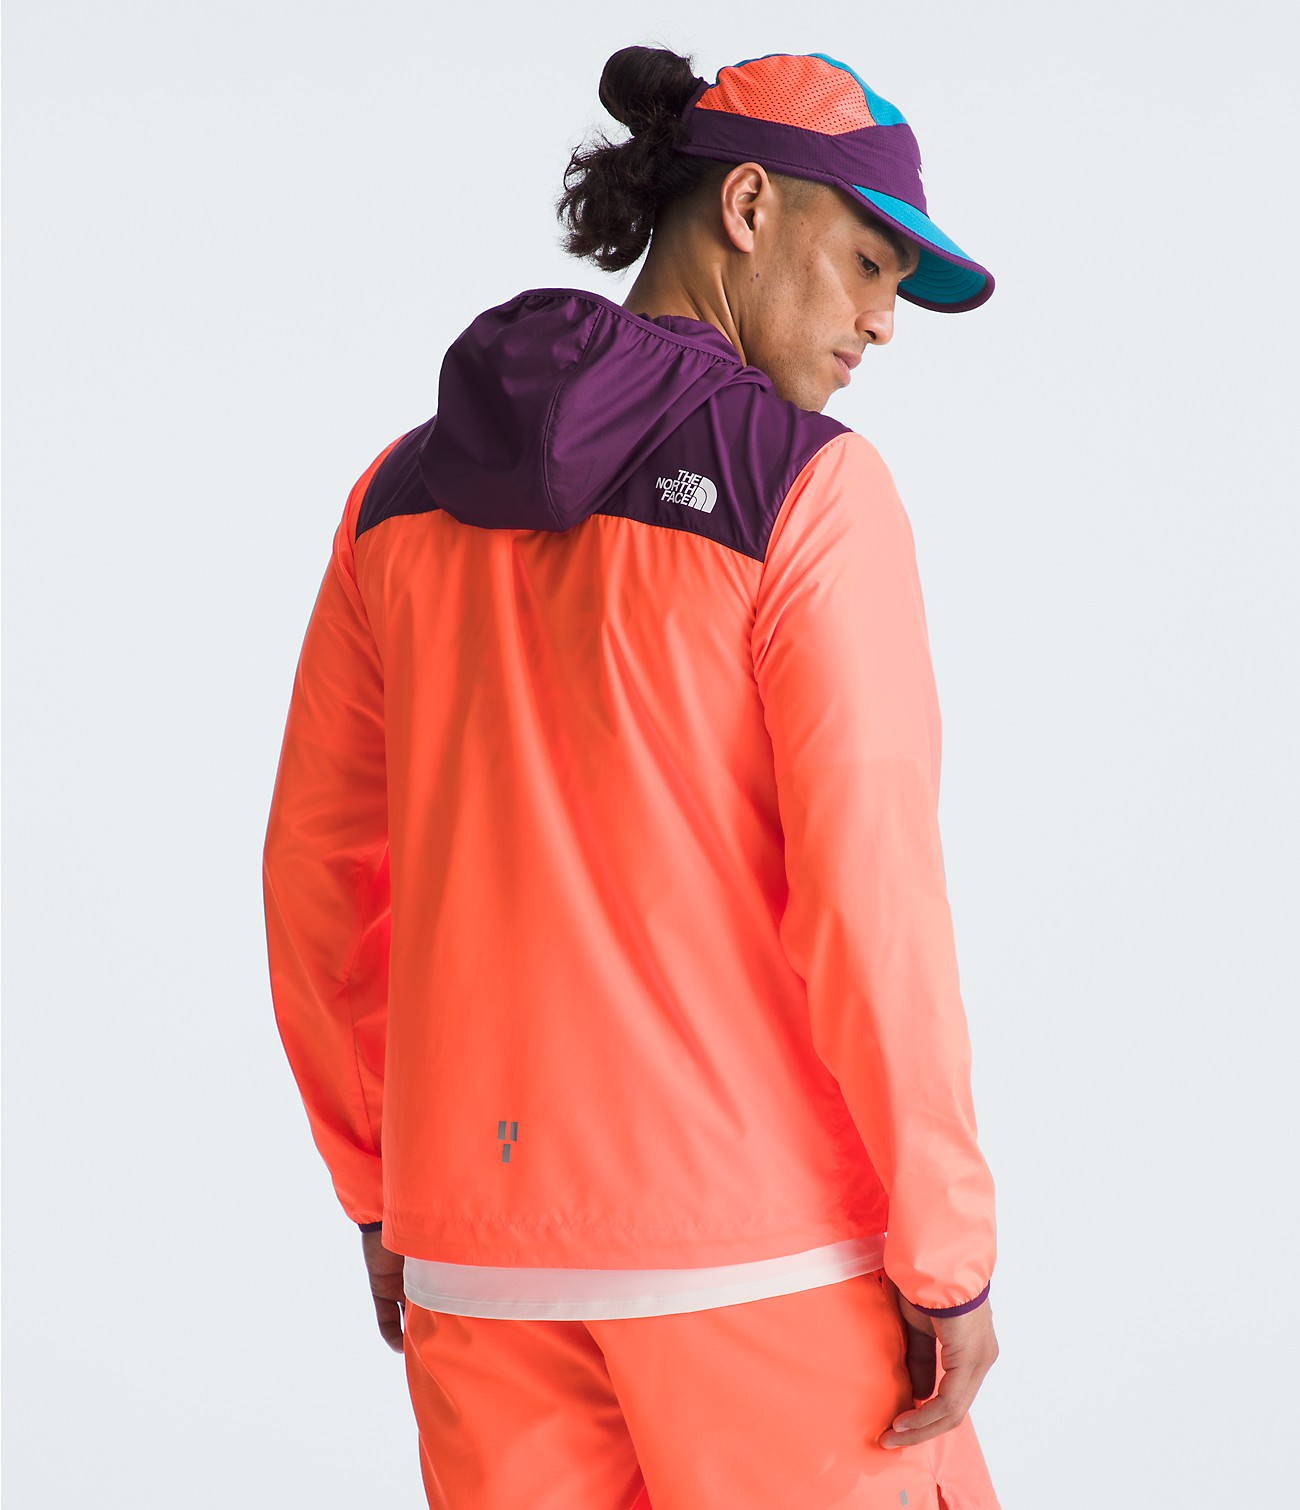 Men’s Higher Run Wind Jacket | The North Face